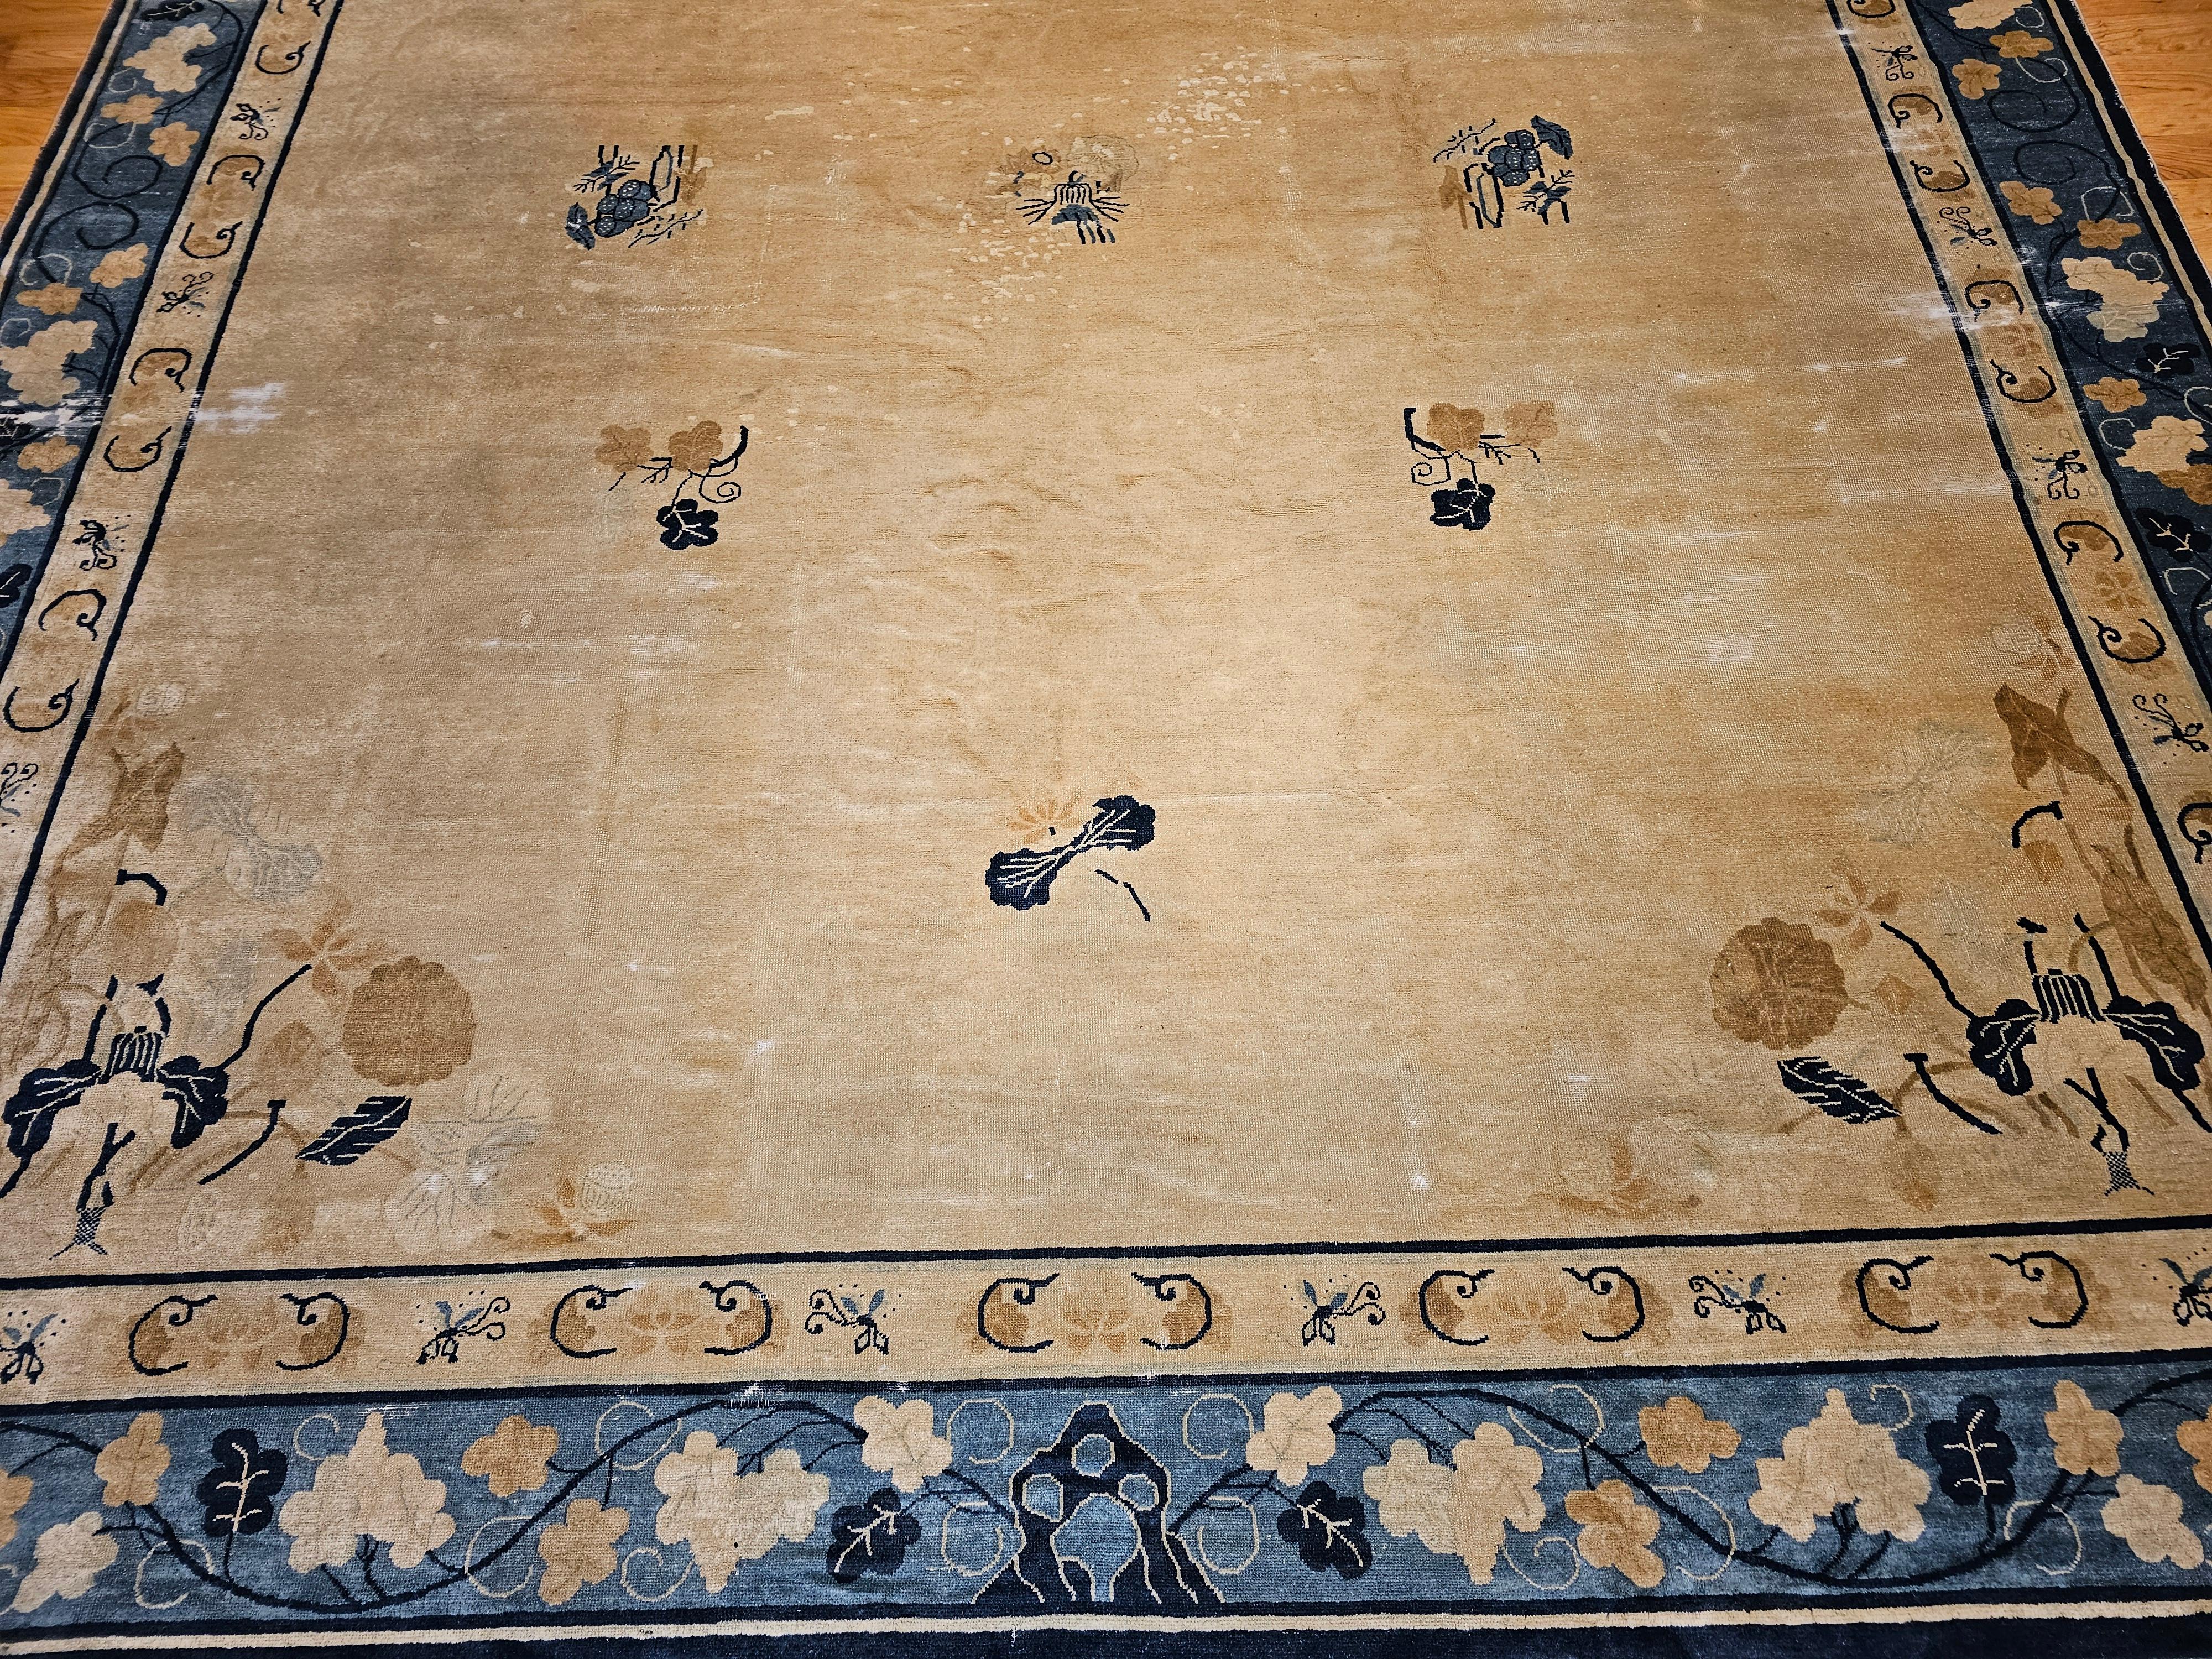 Hand-Knotted 19th Century Oversized Chinese Peking Rug in Wheat, Navy, Brown, Green, Sky-Blue For Sale